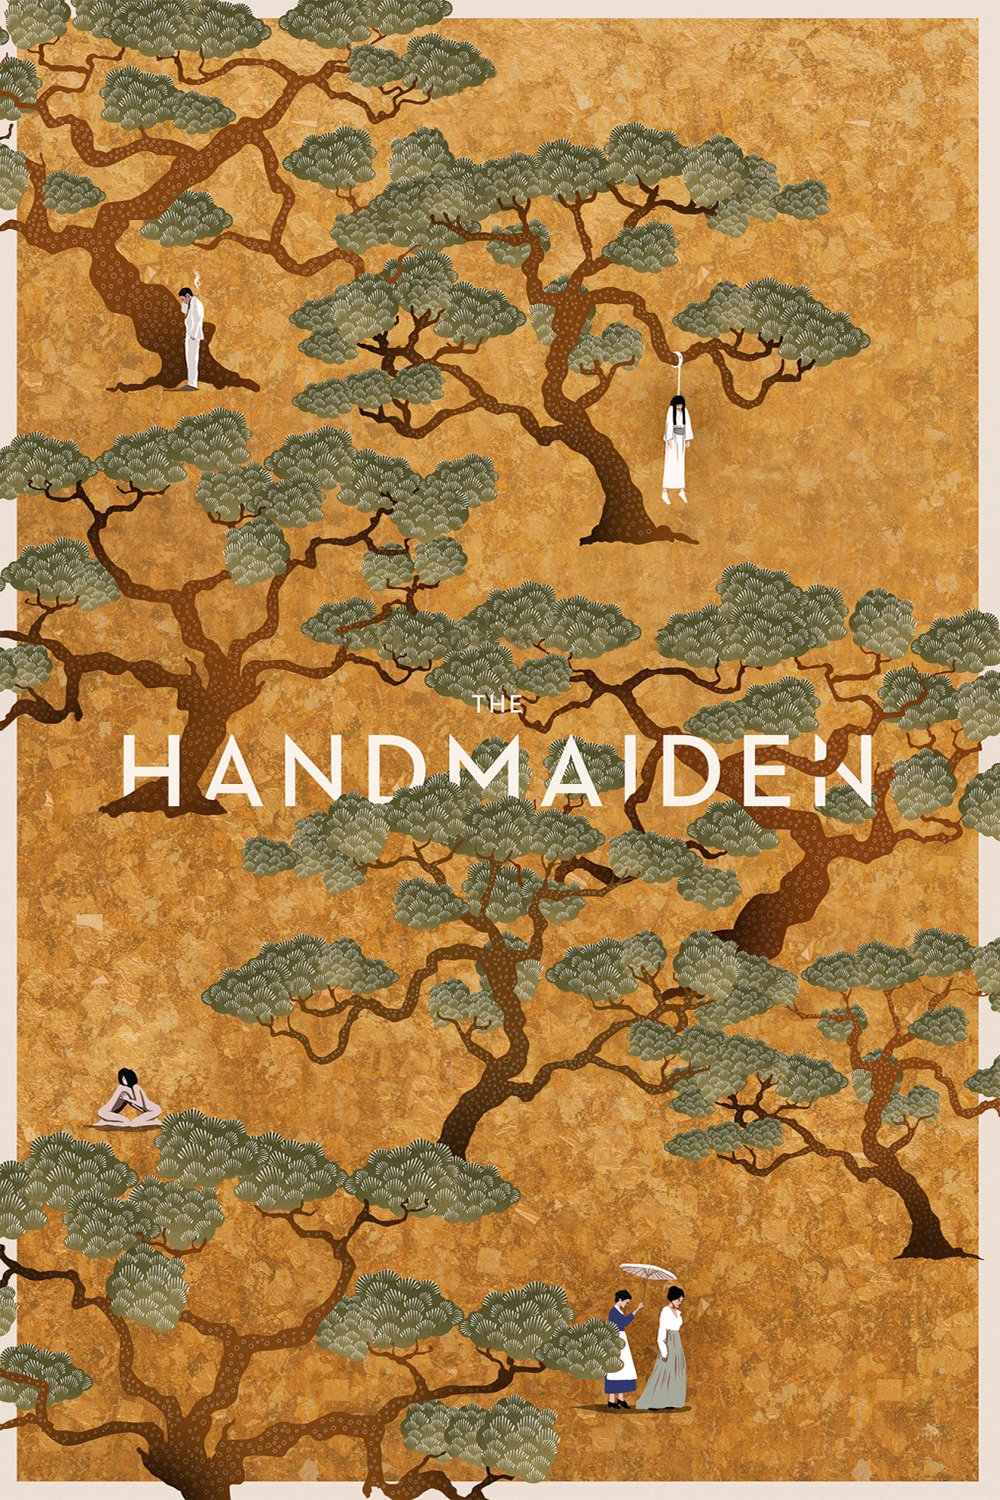 Poster for the movie "The Handmaiden"